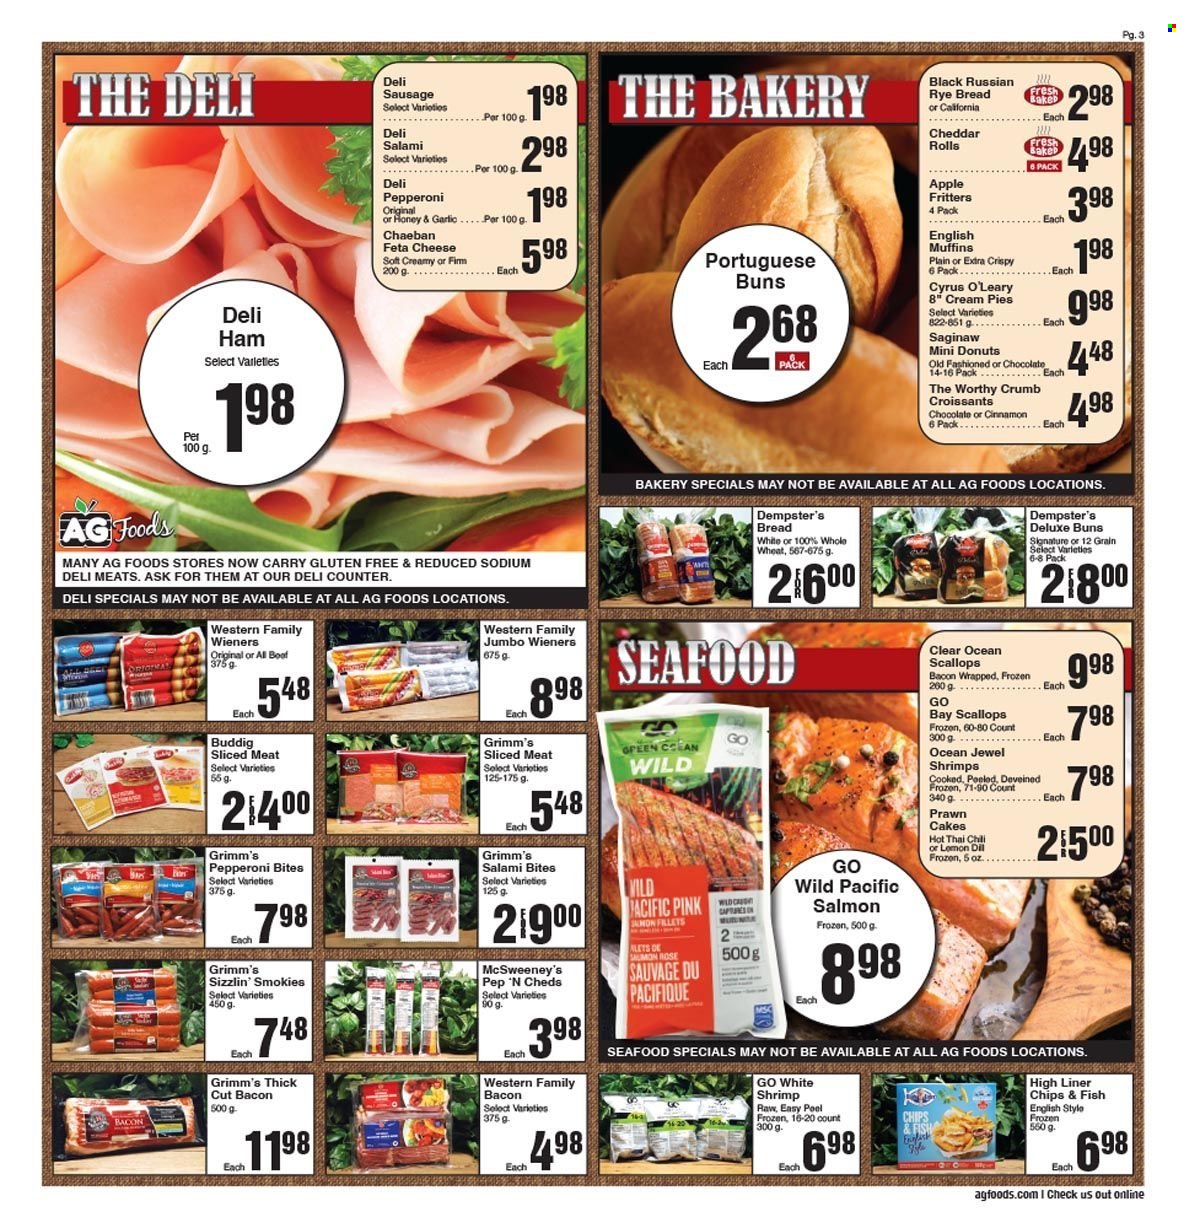 AG Foods flyer  - May 28, 2023 - July 03, 2023.